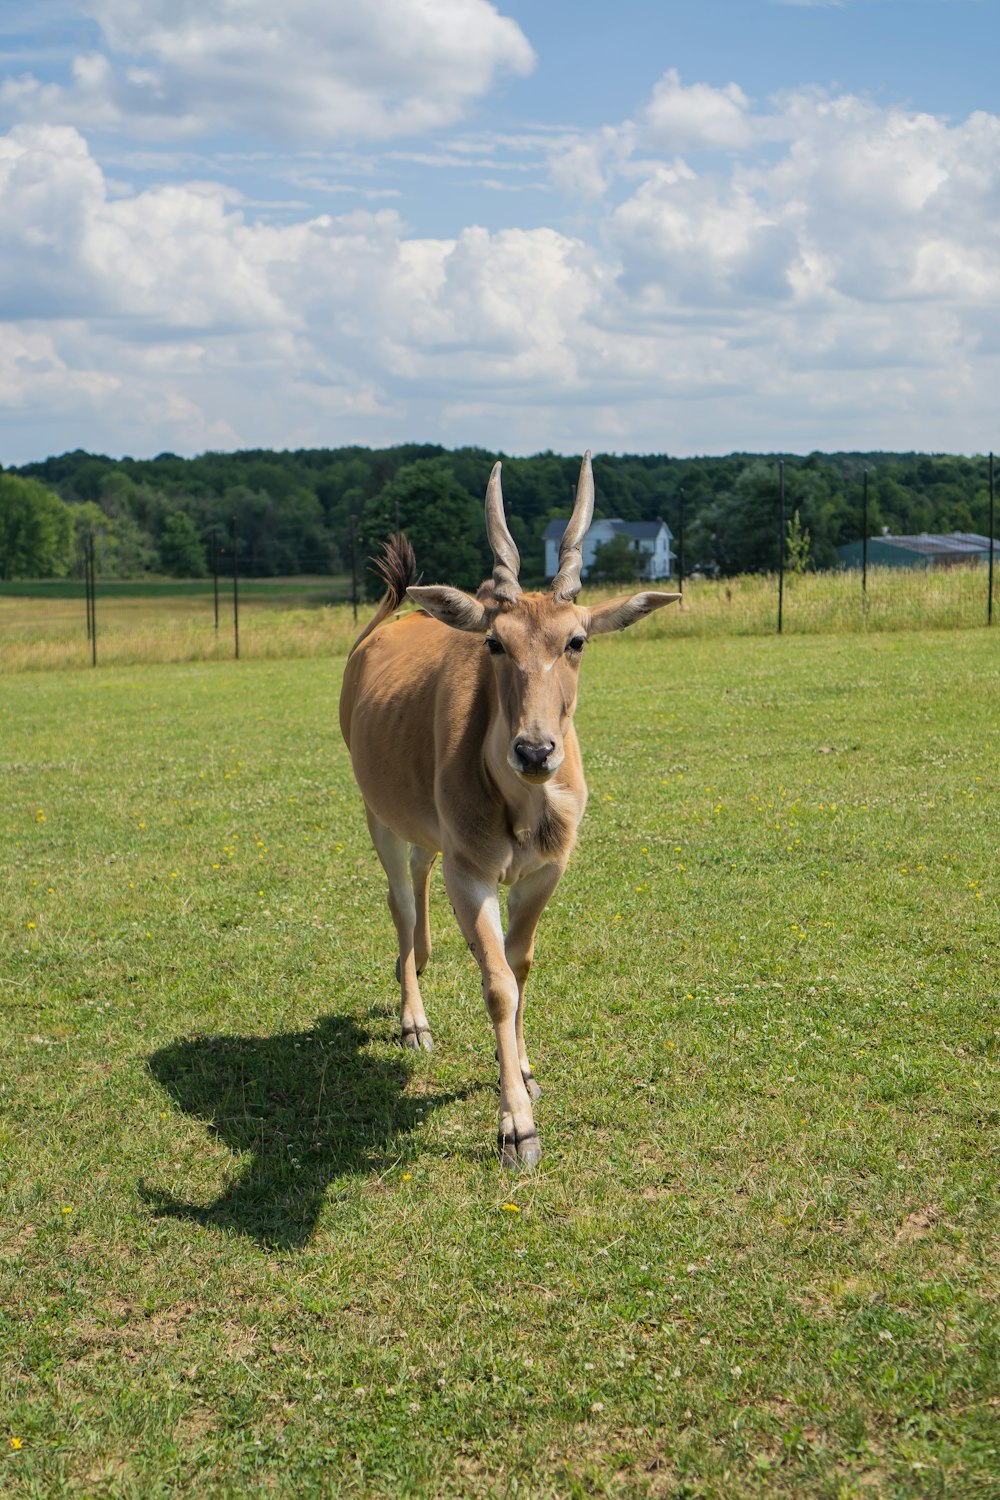 a brown animal with horns standing in a grassy field